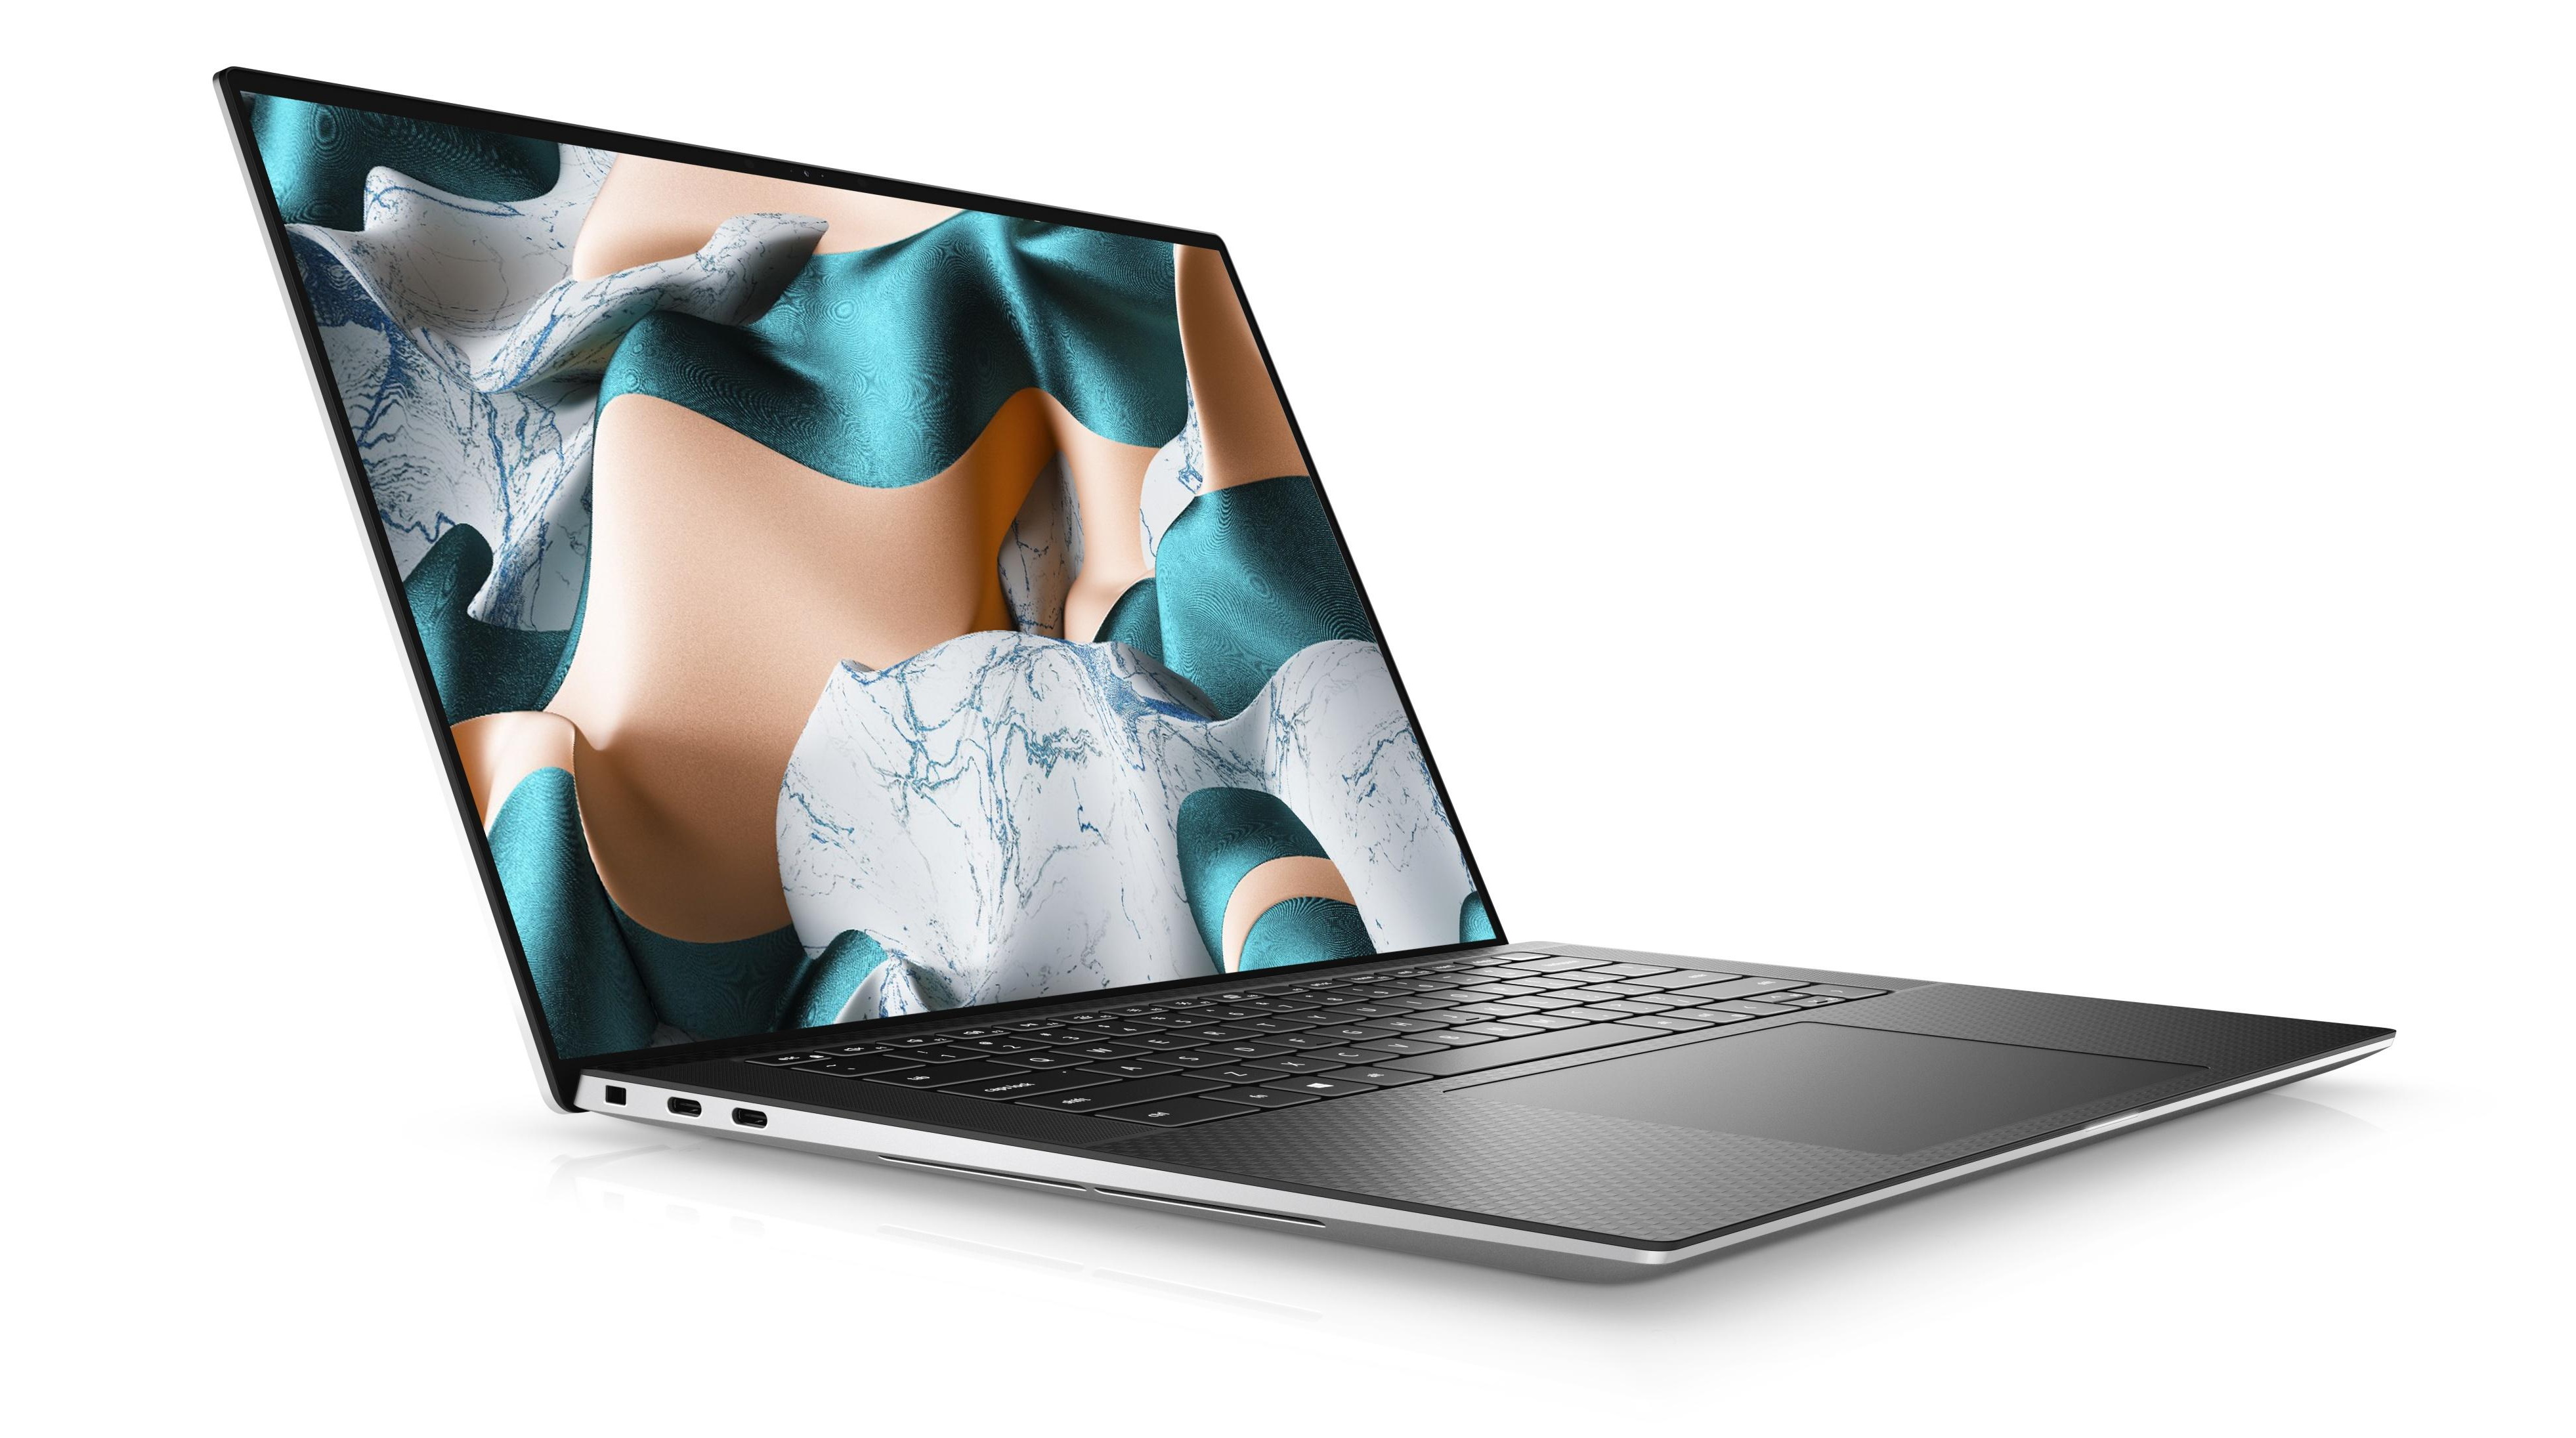 Dell XPS 15 at an angle against a white background